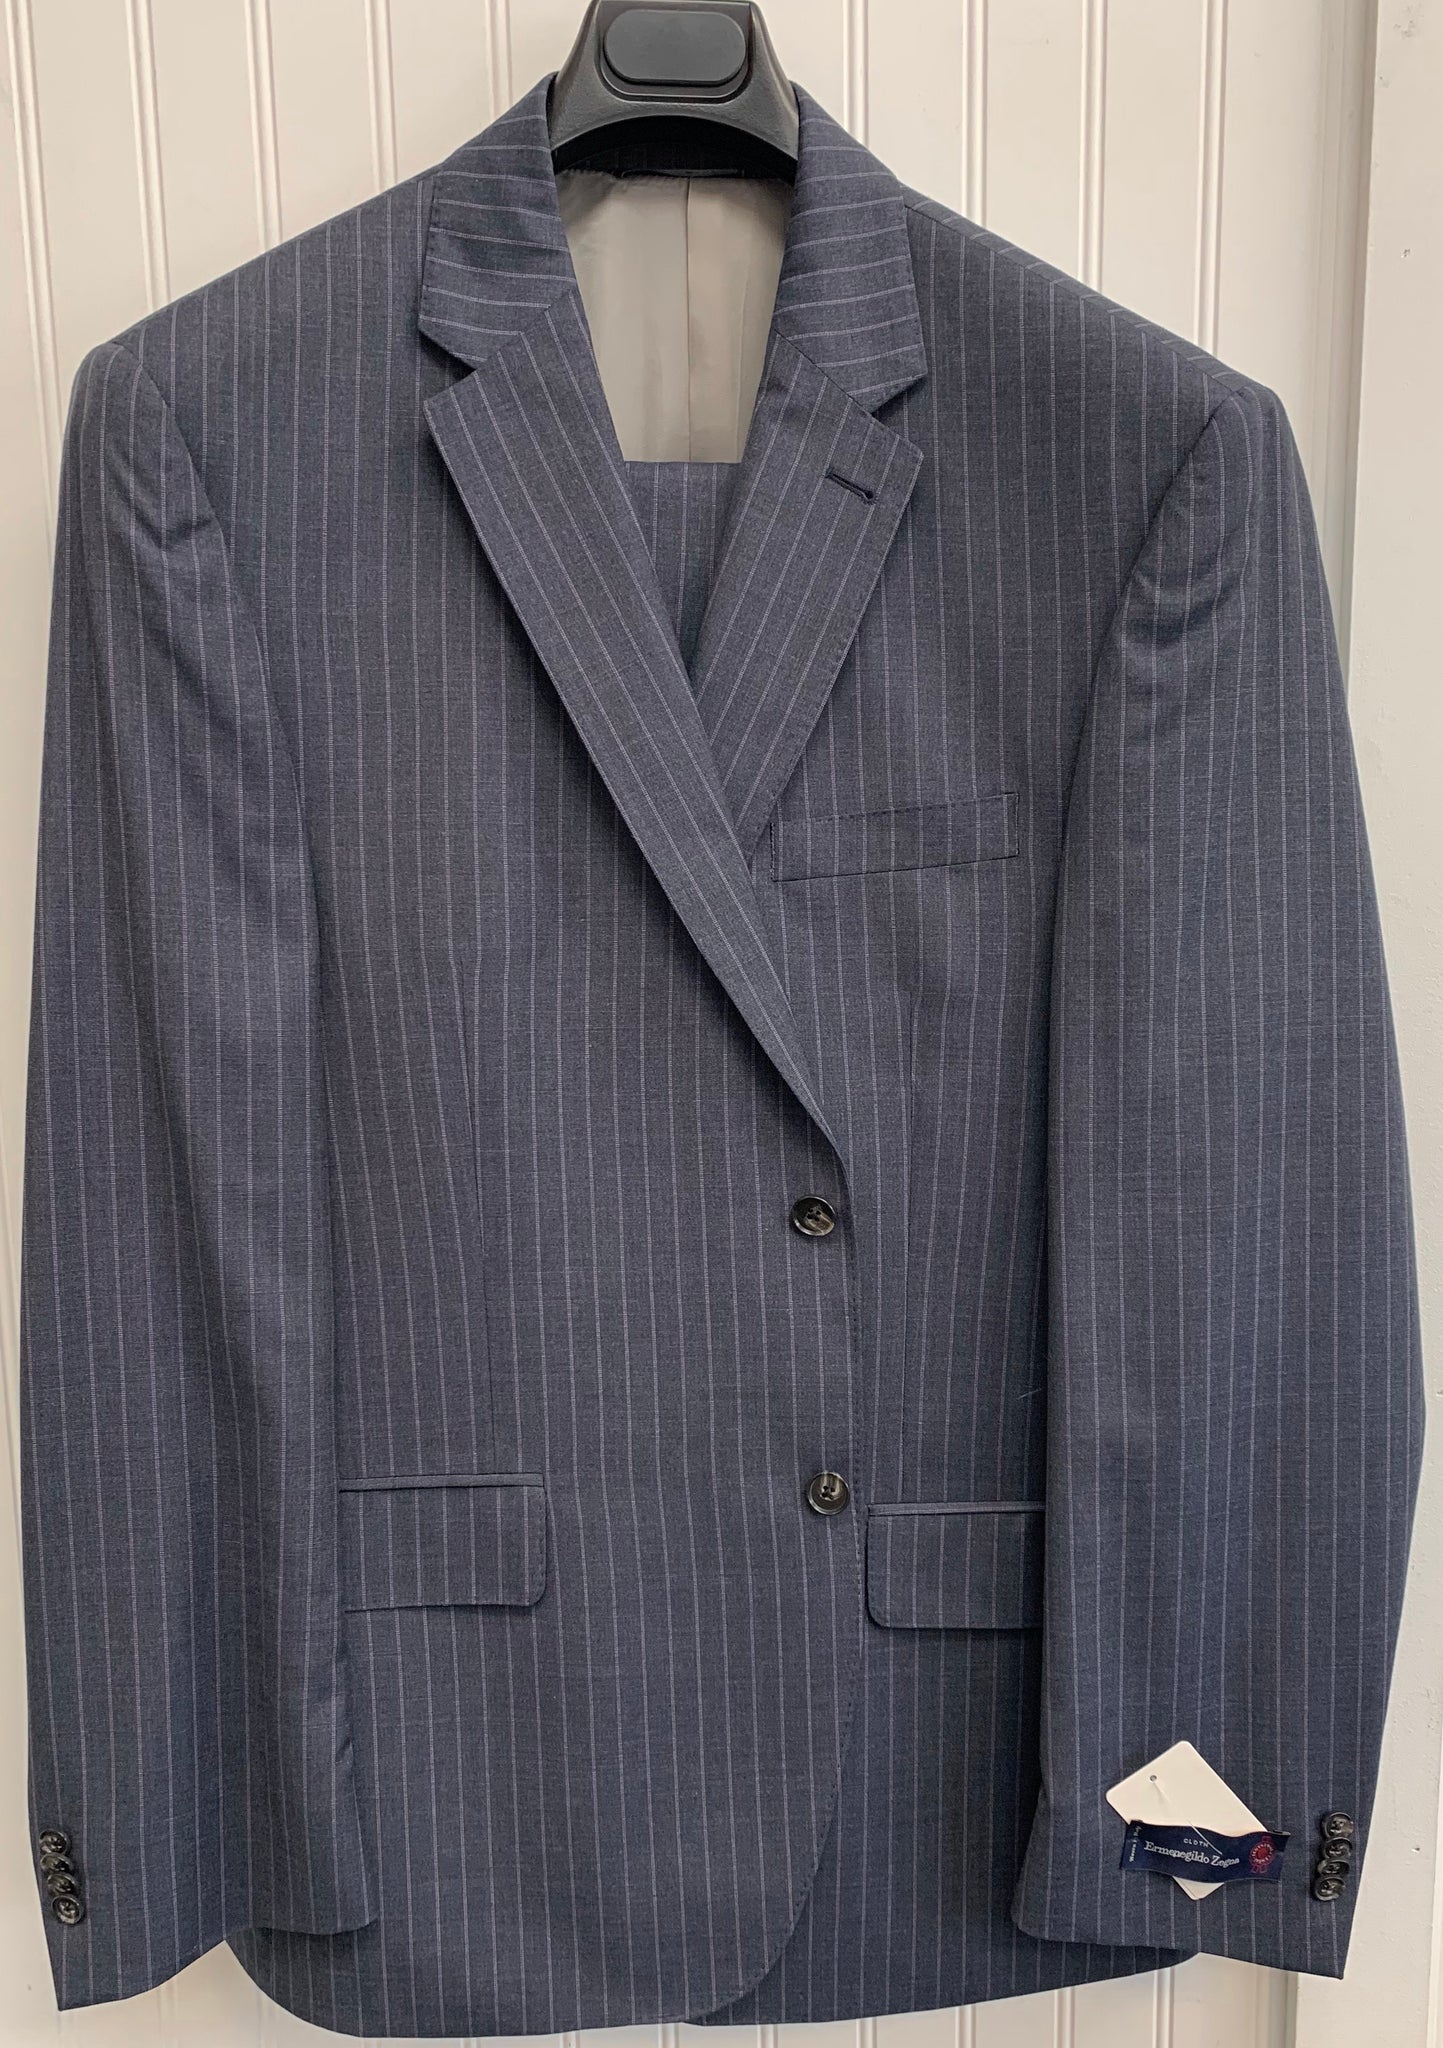 Gainsboro Gray Stripes Double Breasted Premium Wool Blend Suits For Men